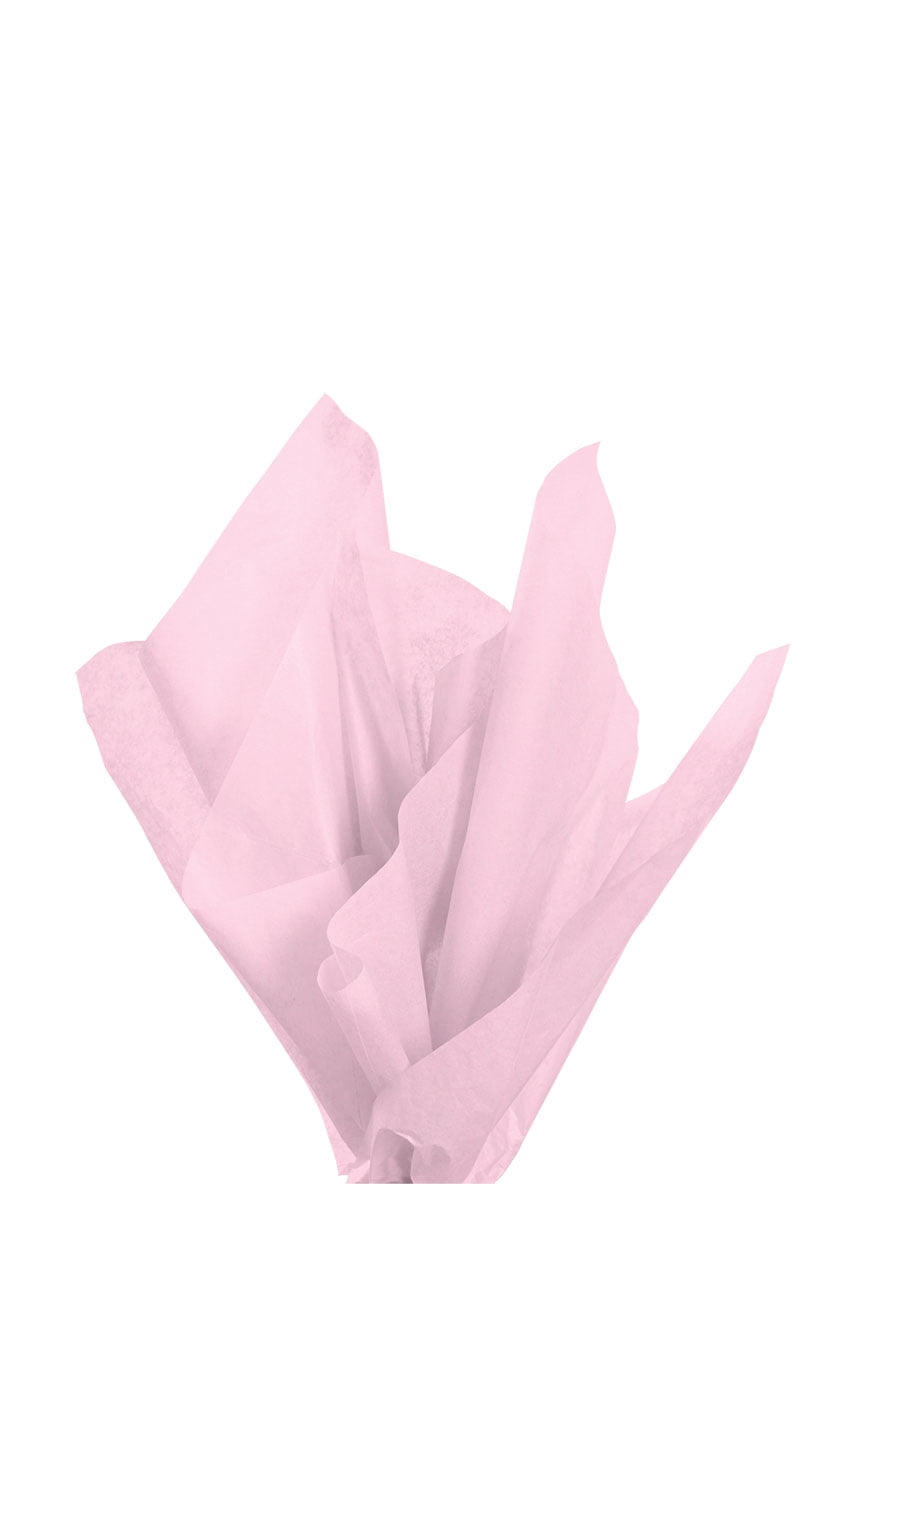 Tissue 20 Count Pink